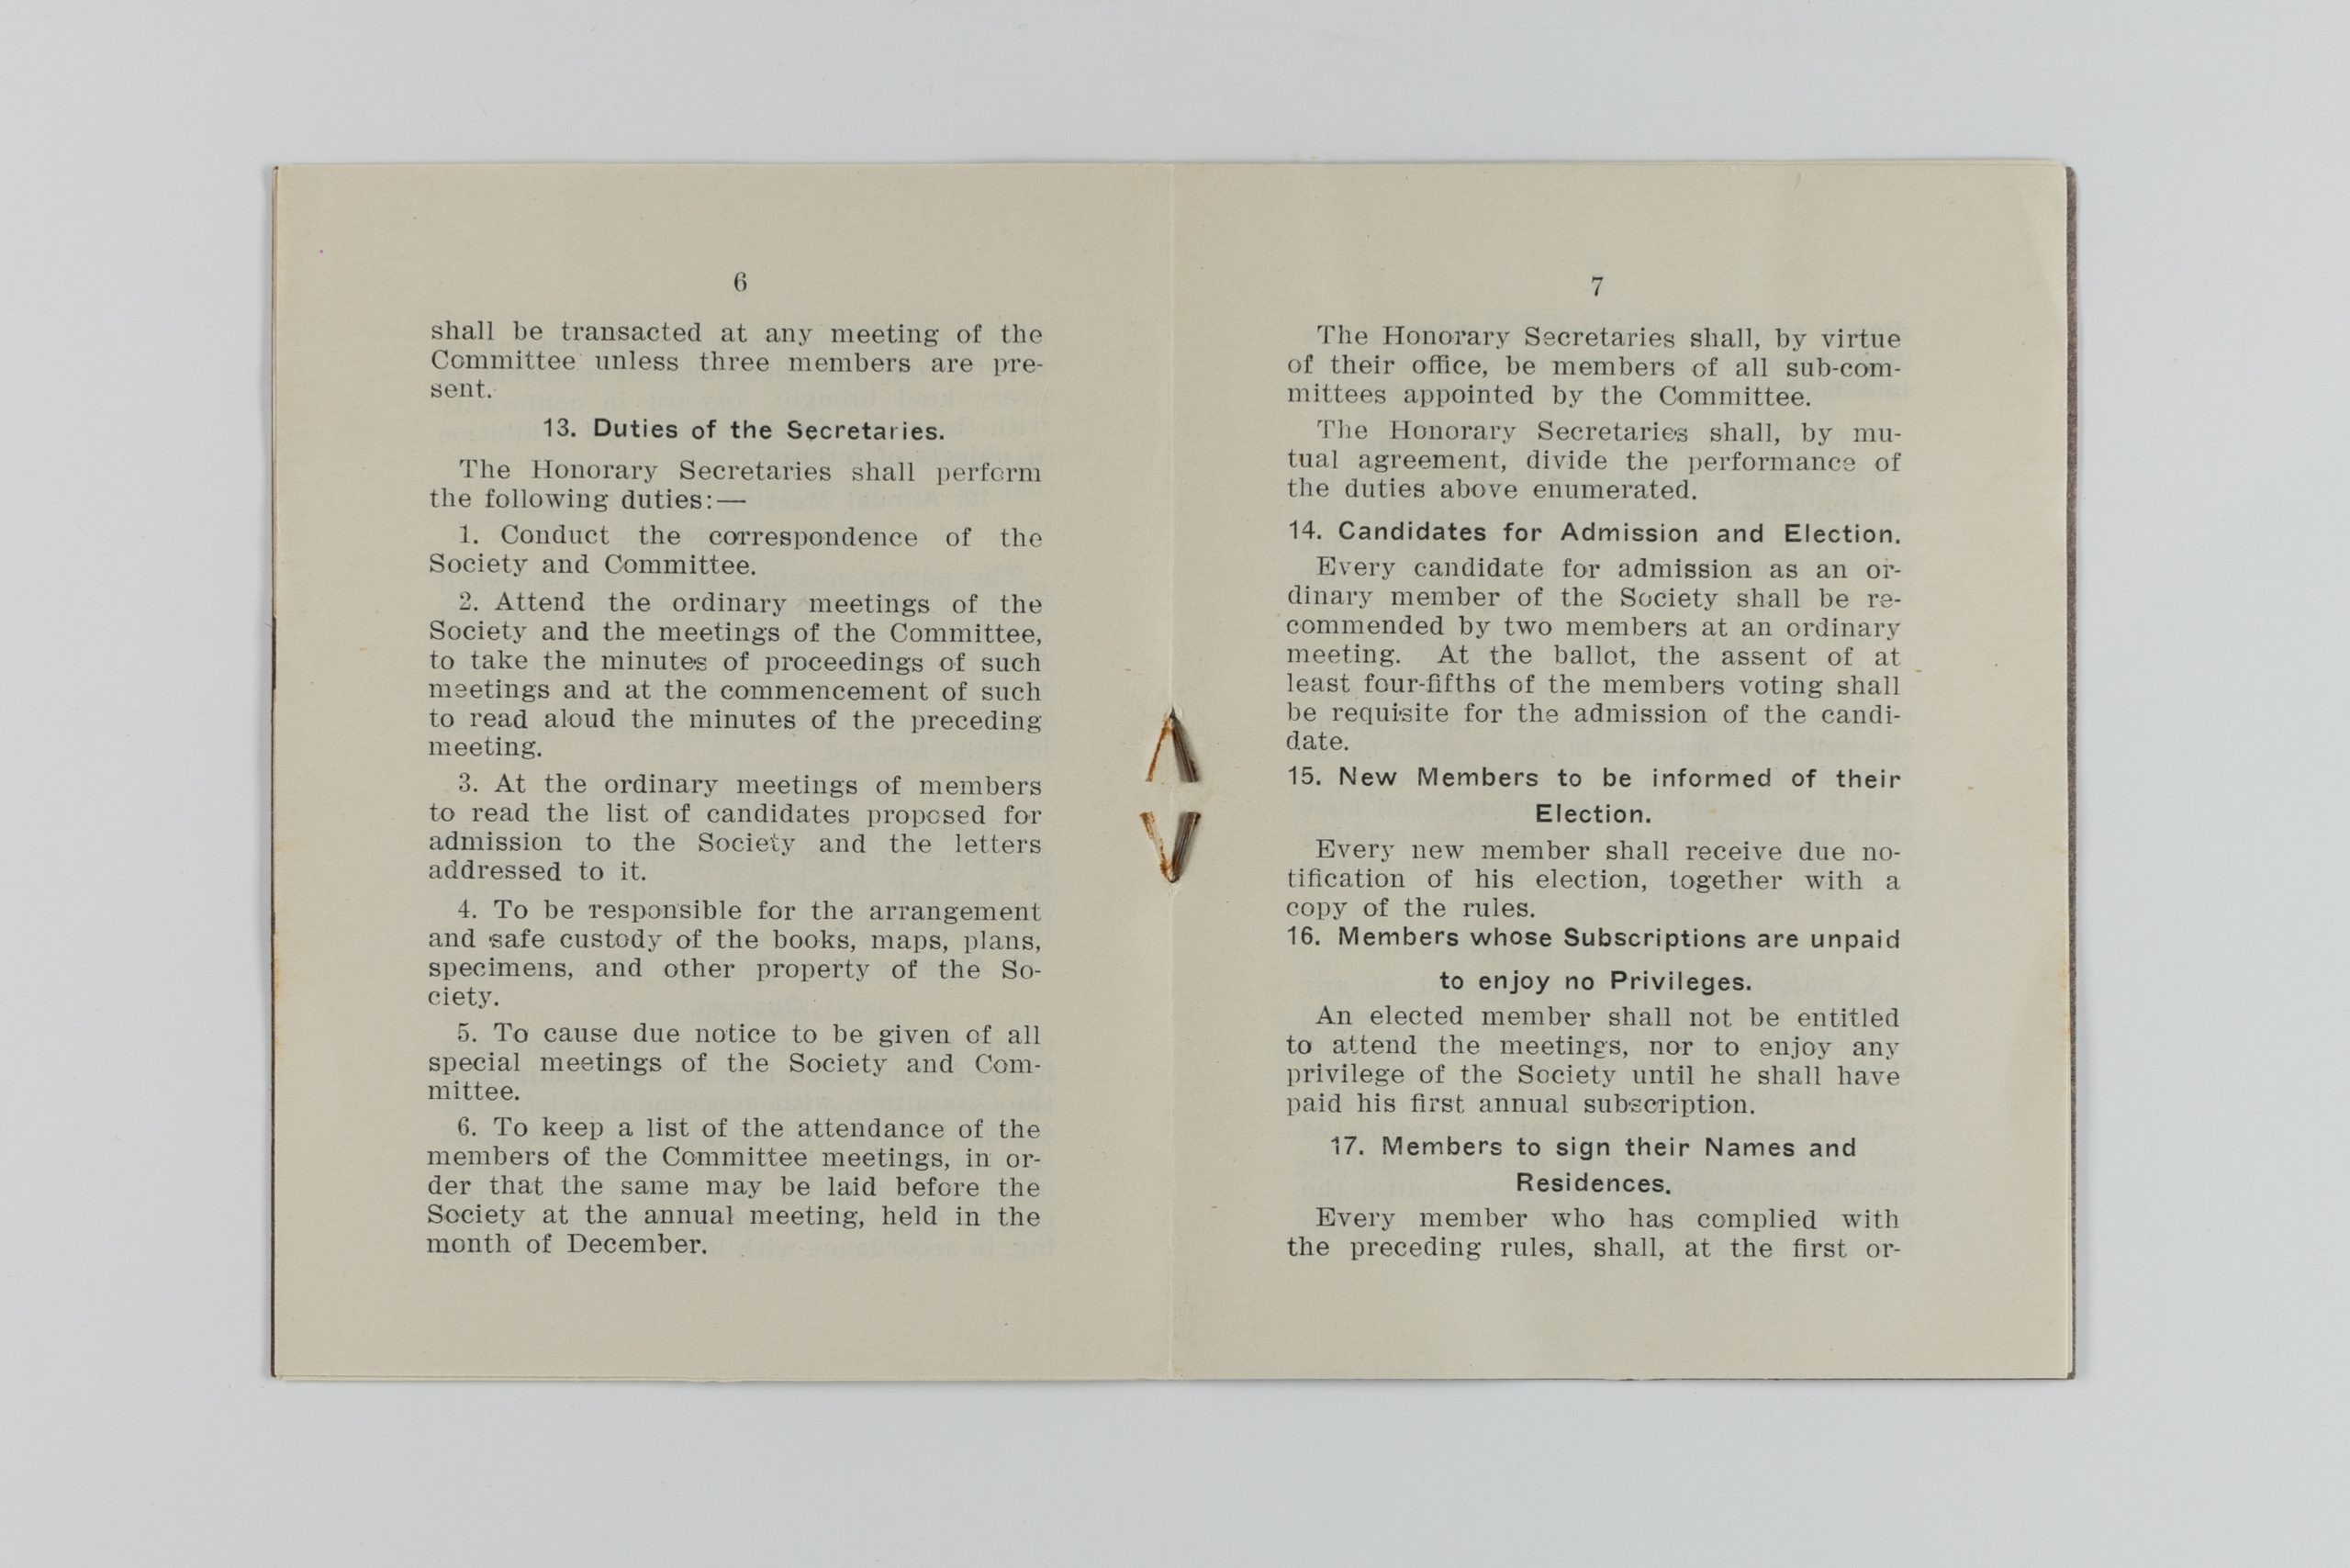 Printed book open to pages showcasing rules 12-17, including duties of secretaries, candidates for admission/election, new members to be informed of election, and signatures from members.